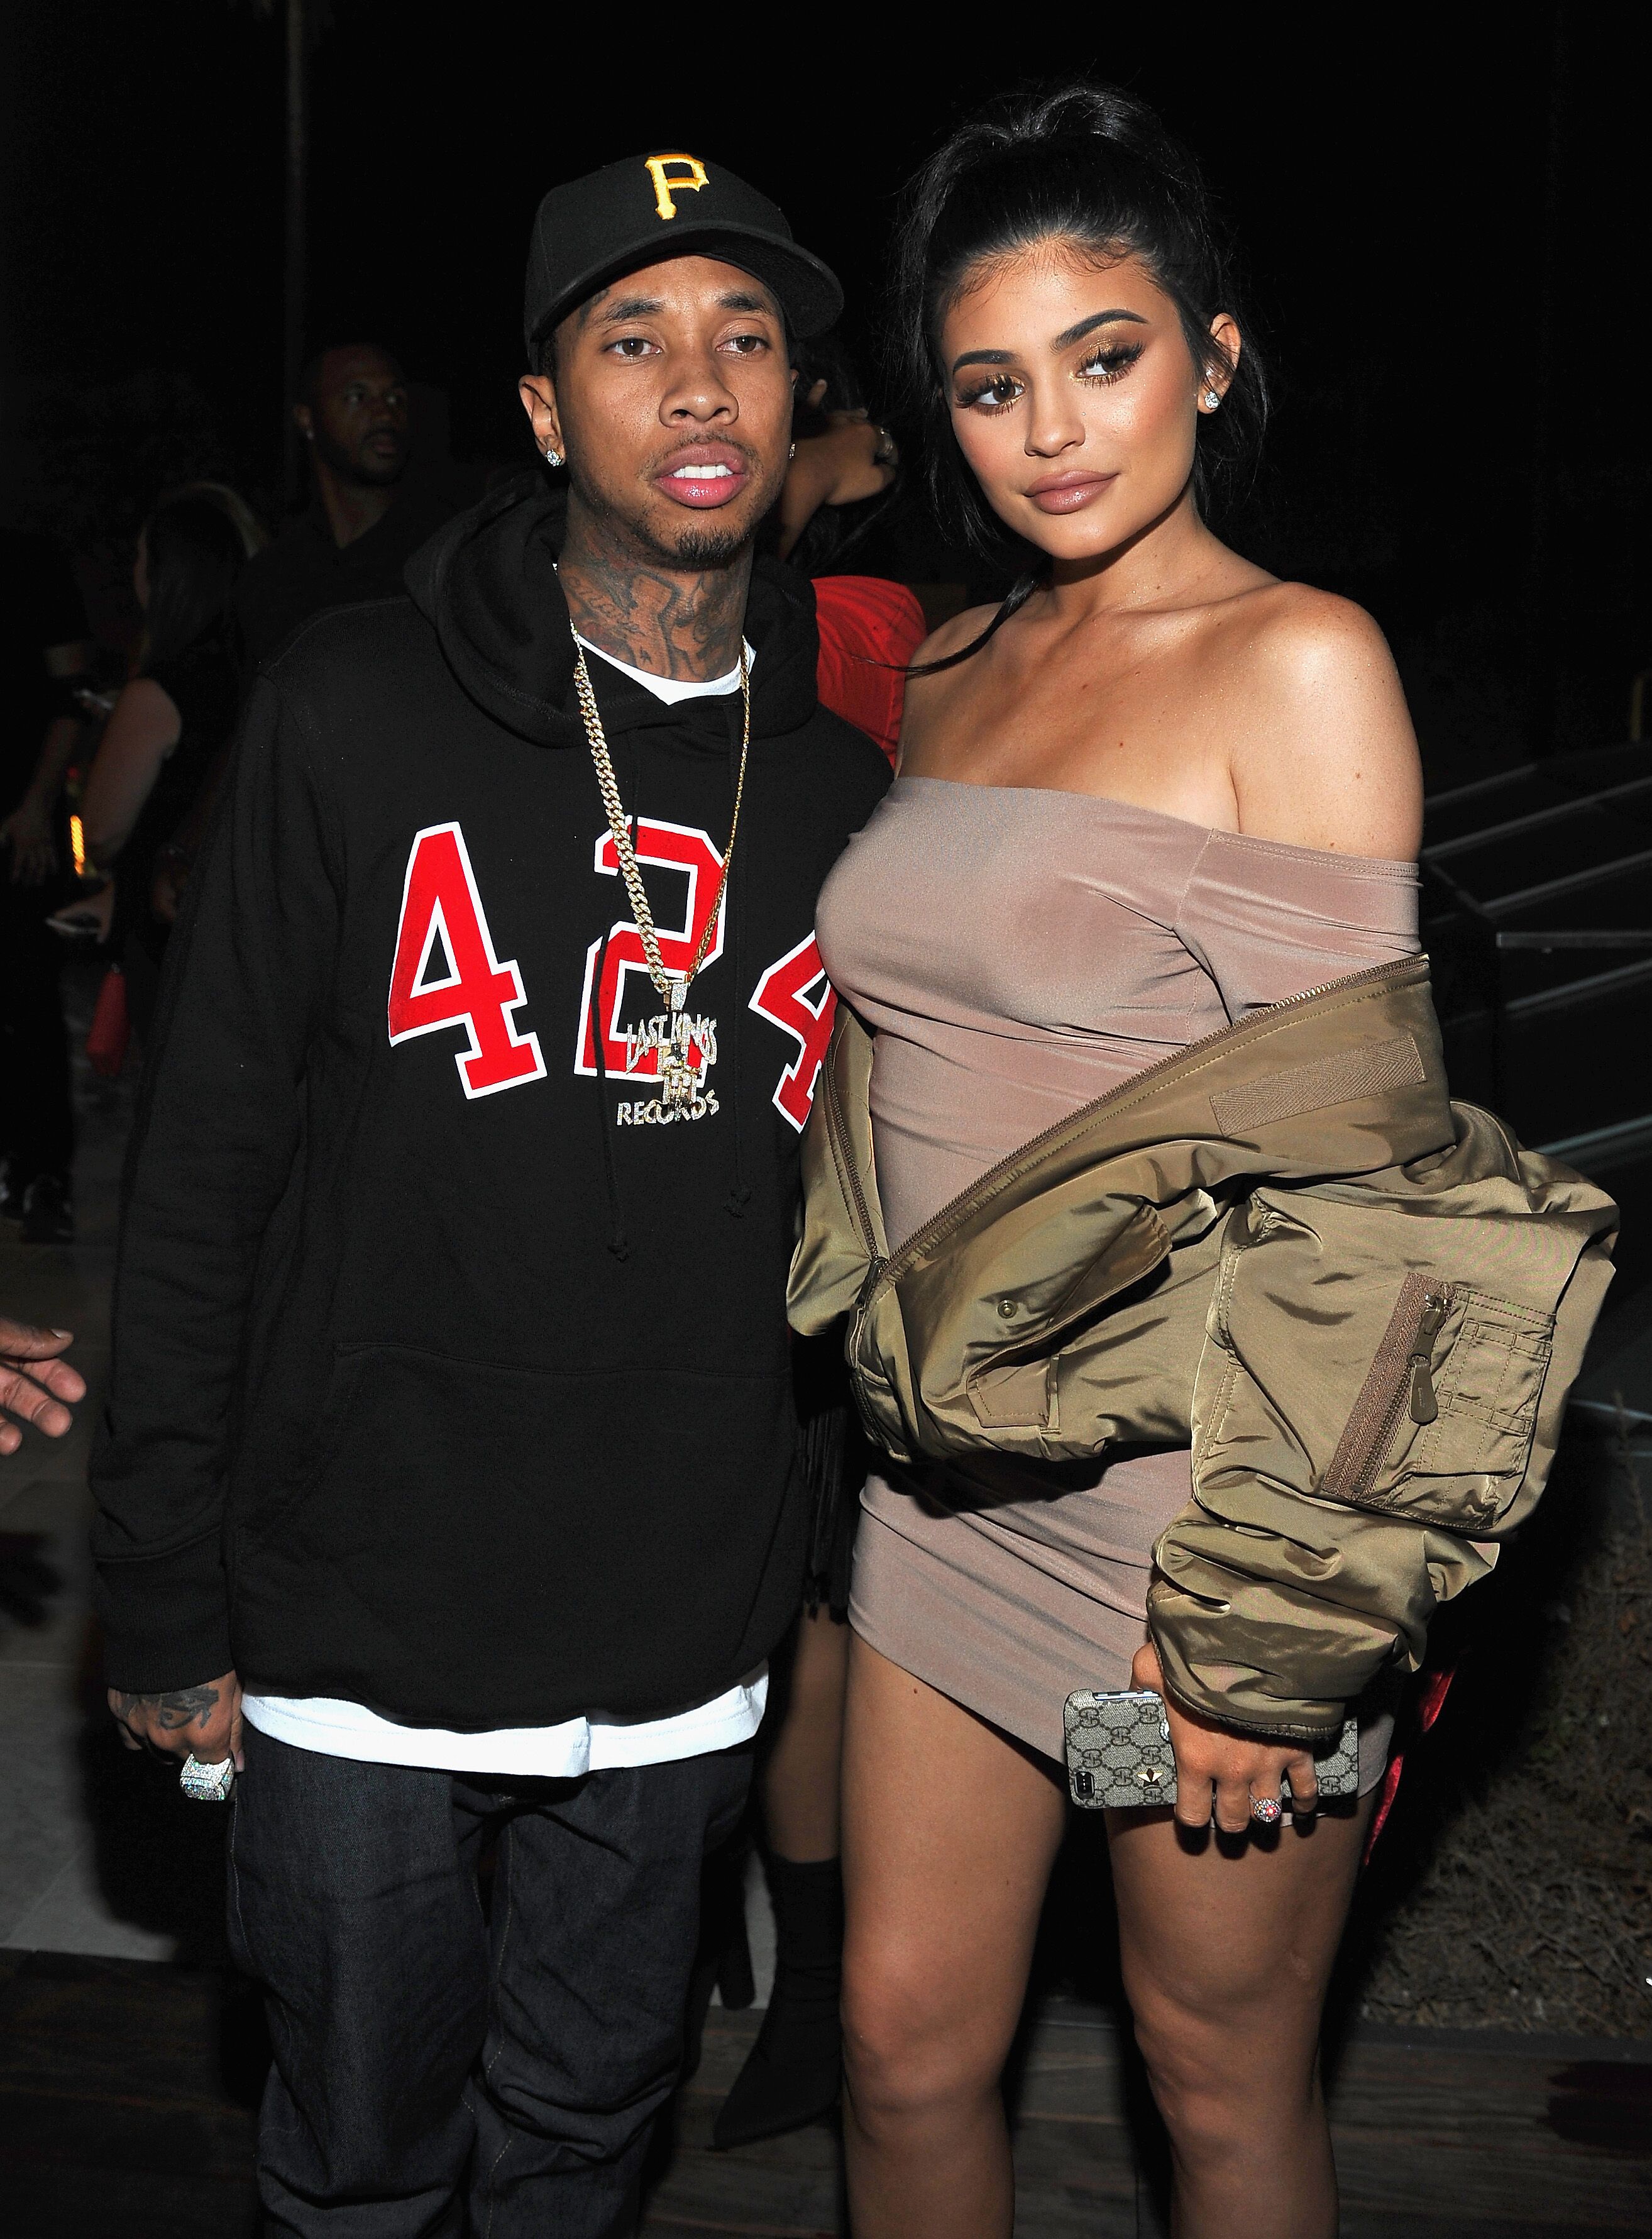 Kylie Jenner with ex-boyfriend Tyga/ Source: Getty Images